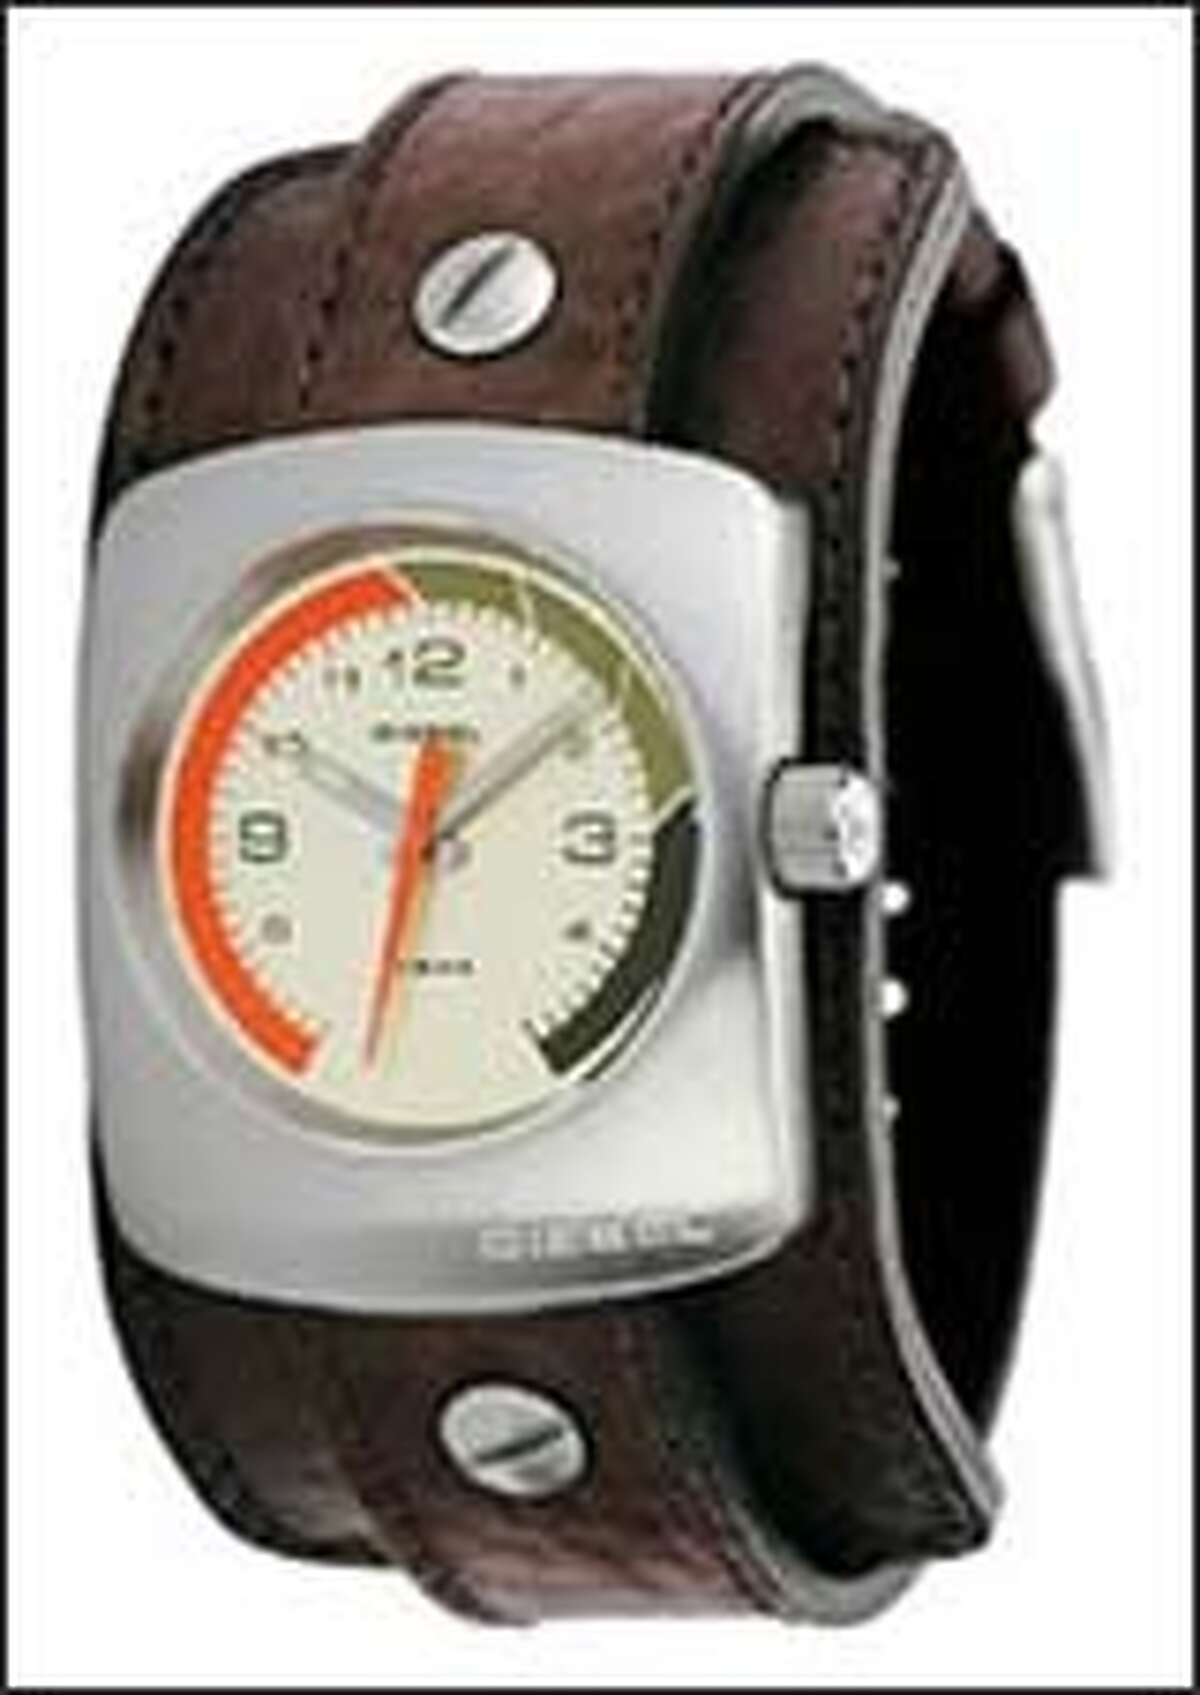 Watches are real attention-grabbers these days. This cuff watch is made by Diesel and costs $85.